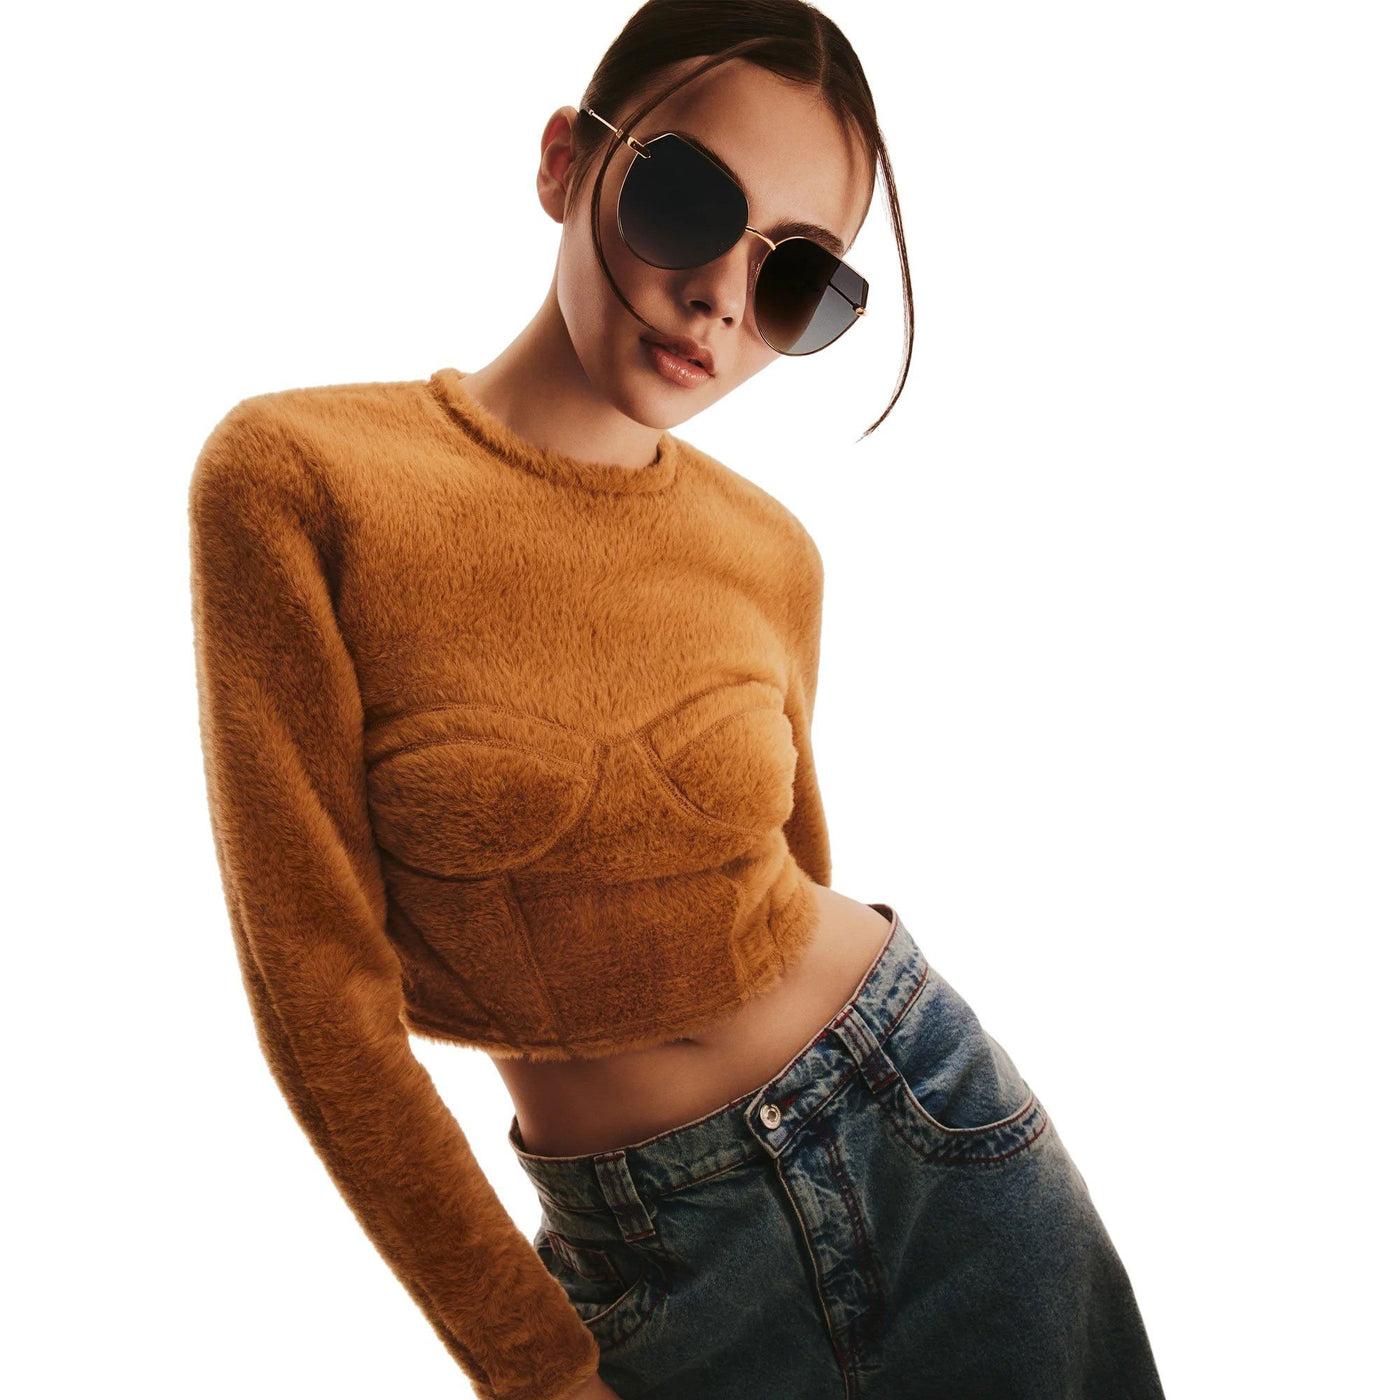 A model posing wearing Quay Women's Main Character Oversized Flat-Top Rounded Sunglasses